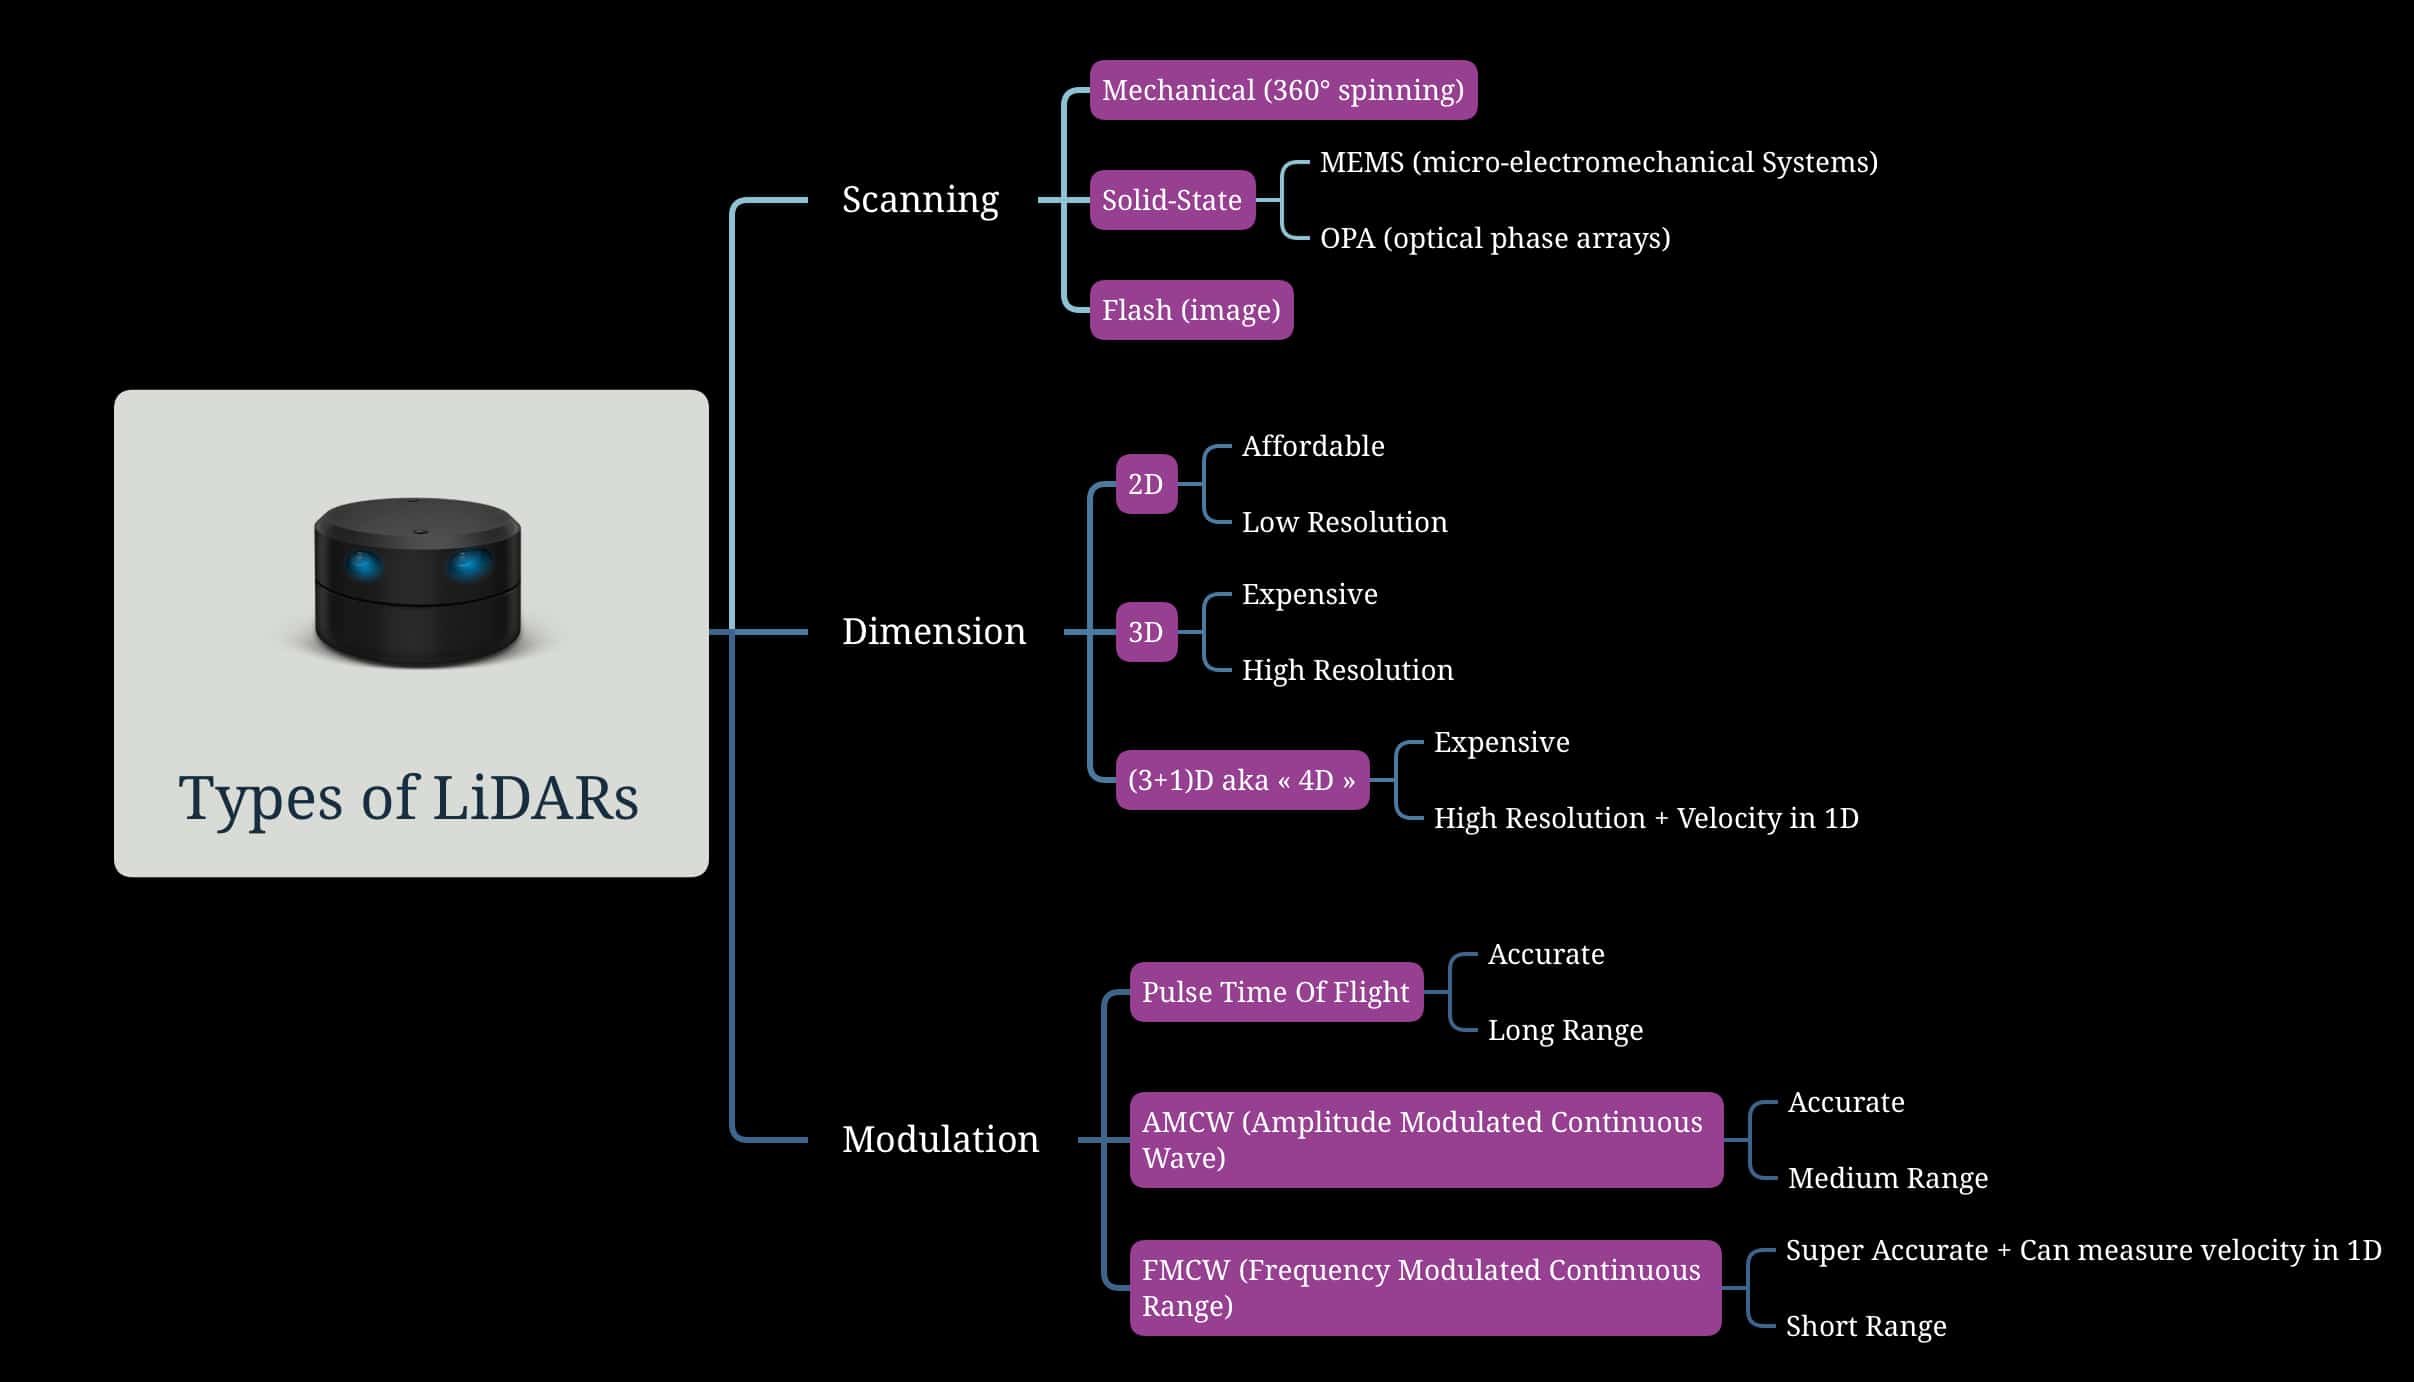 (Mindmap) A Hardcore Look at 9 types of LiDAR systems